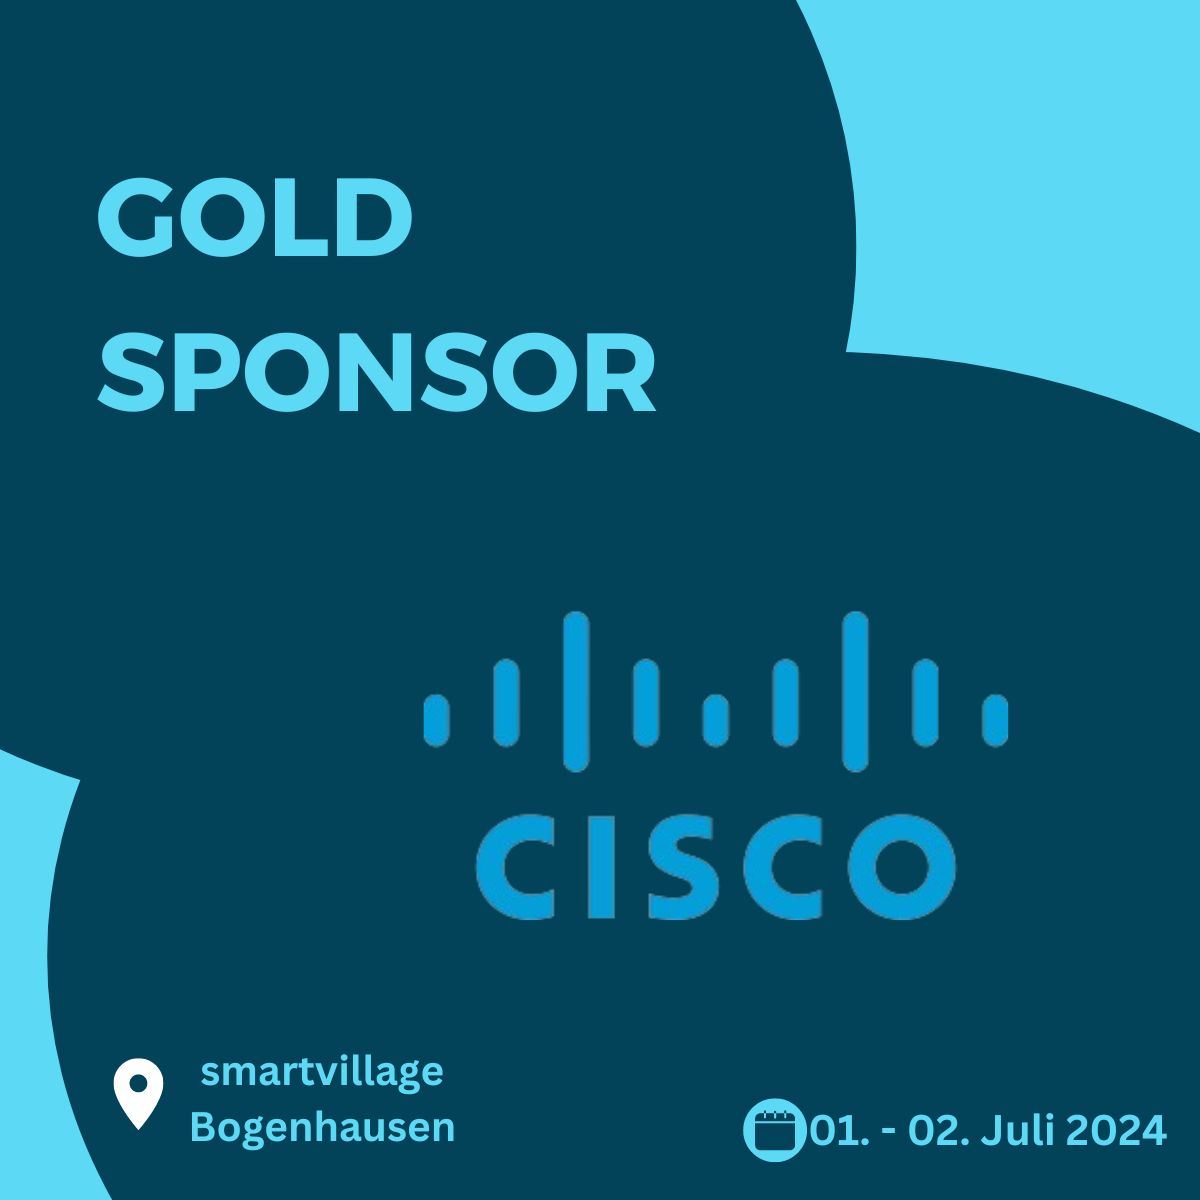 🌟 Welcome @Cisco to the #KCDMunich! Thank you for supporting us as a gold sponsor! 🙌🏻 #silversponsor #kubernetes #cloudnative #cloudnativedevelopment #softwaredevelopment #itevent #devops #opensource #community #munich